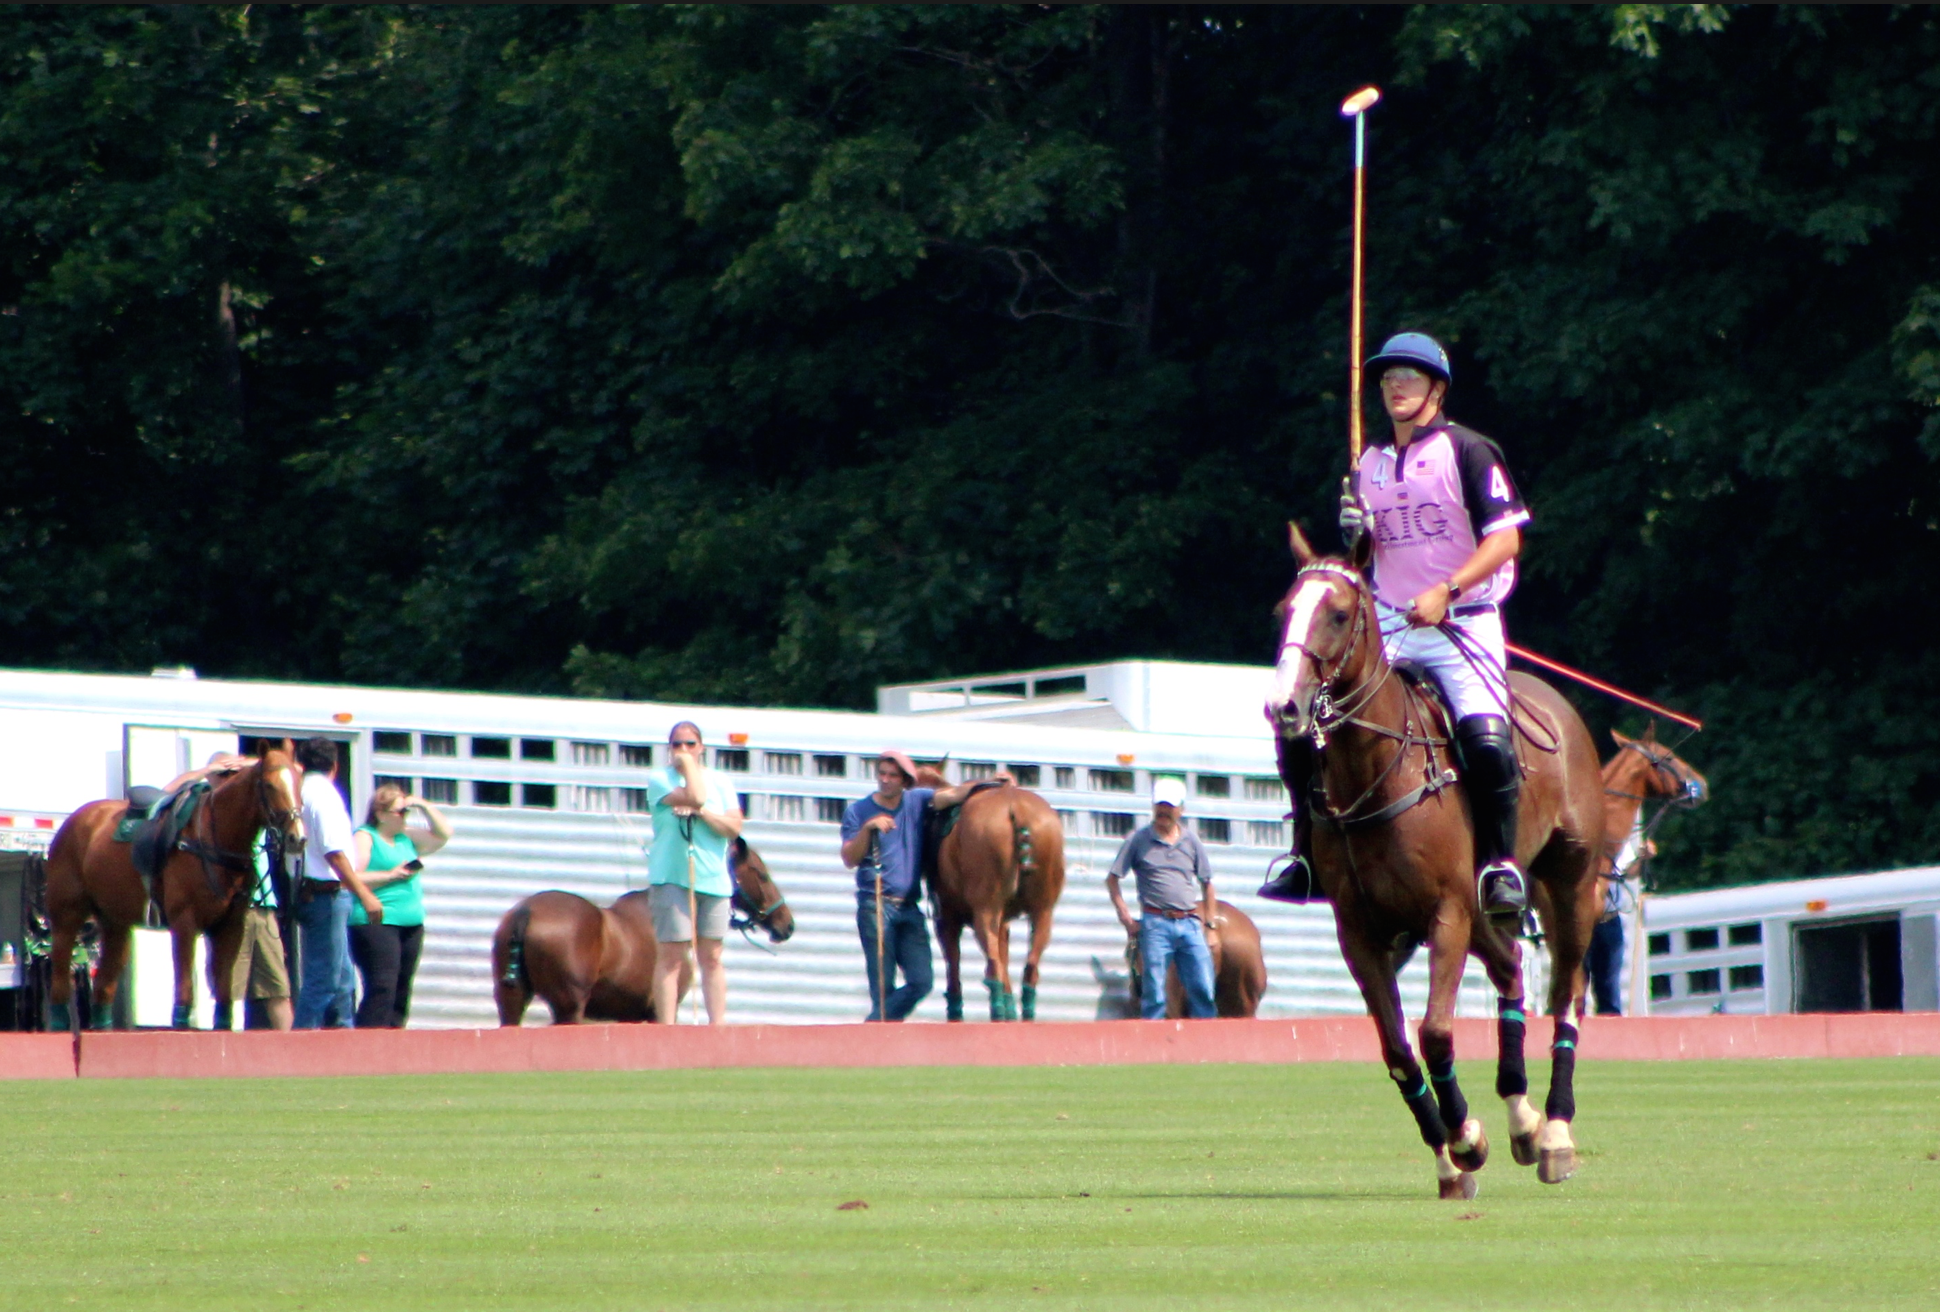 Polo match at Greenwich Polo Club, July 12, 2015. Credit: Leslie Yager